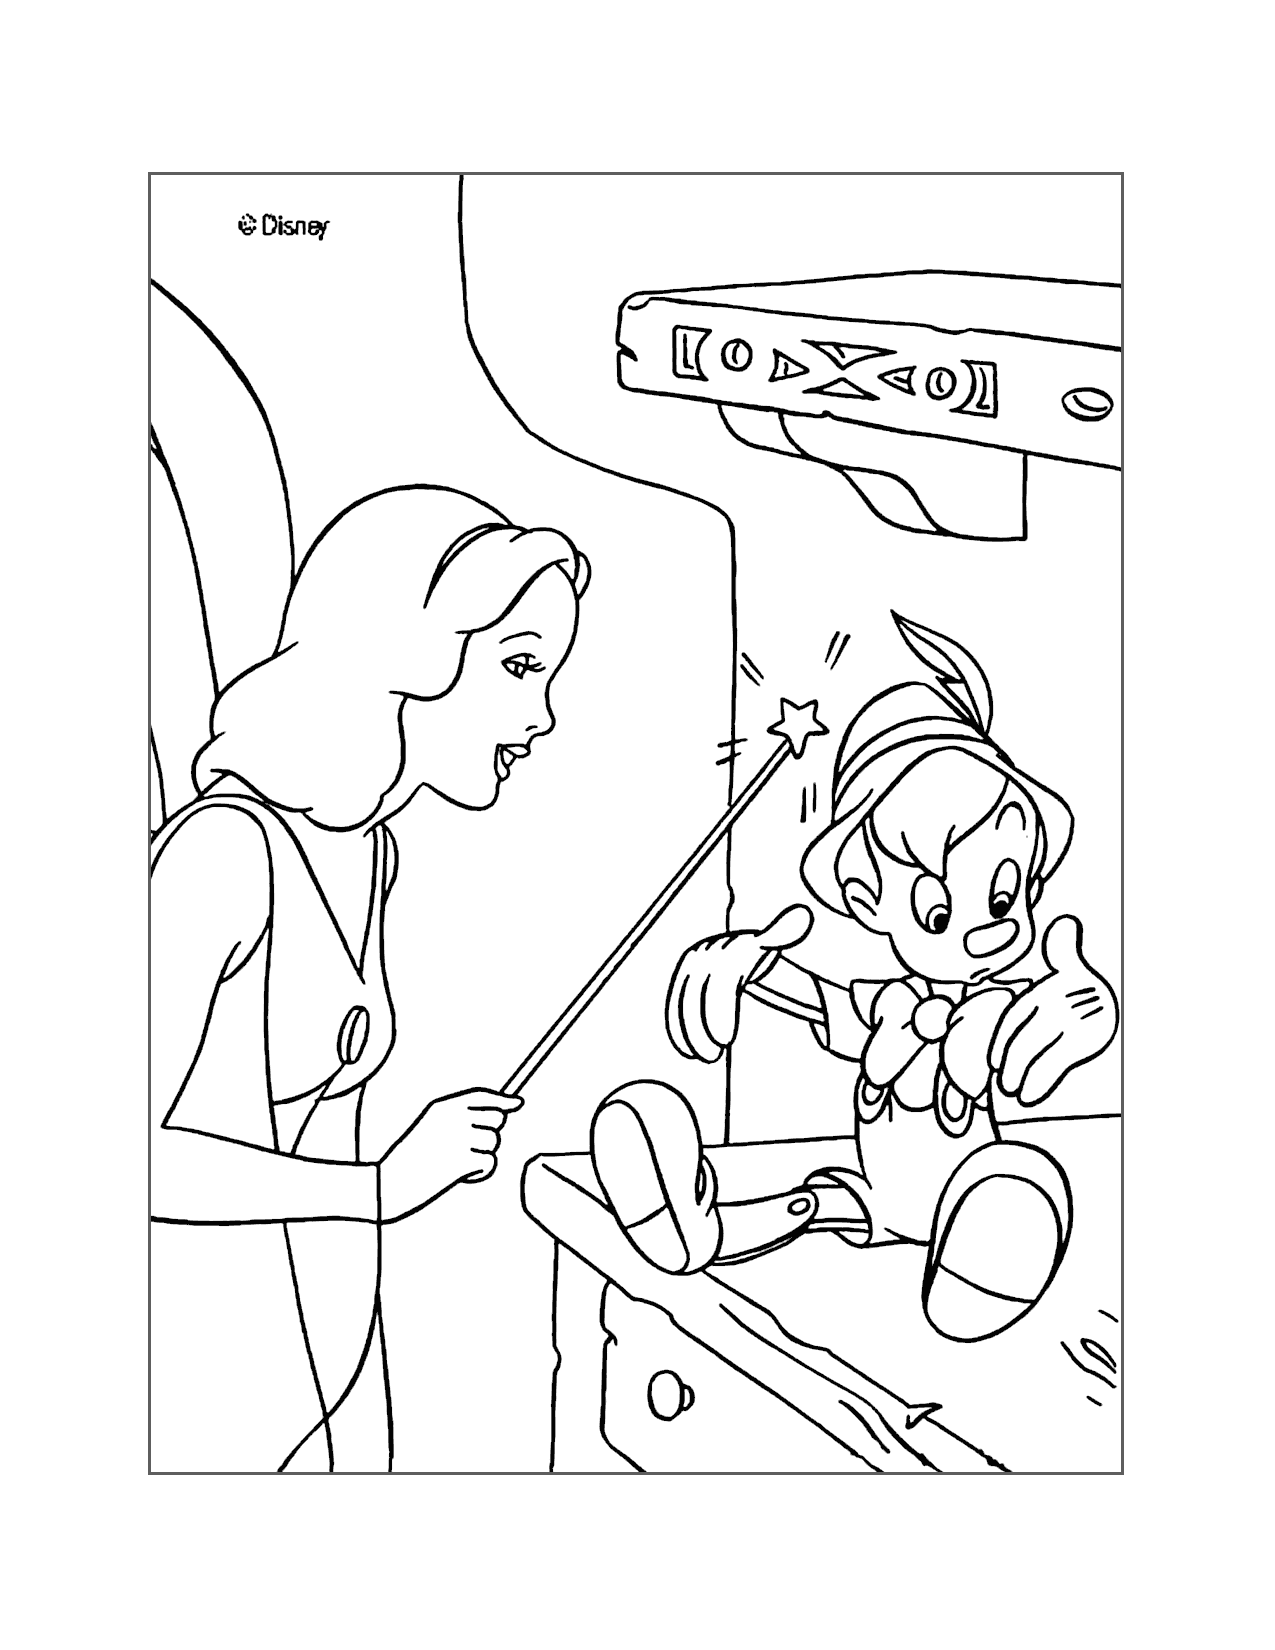 The Fairy Will Change Pinnochio Into A Real Boy Coloring Page